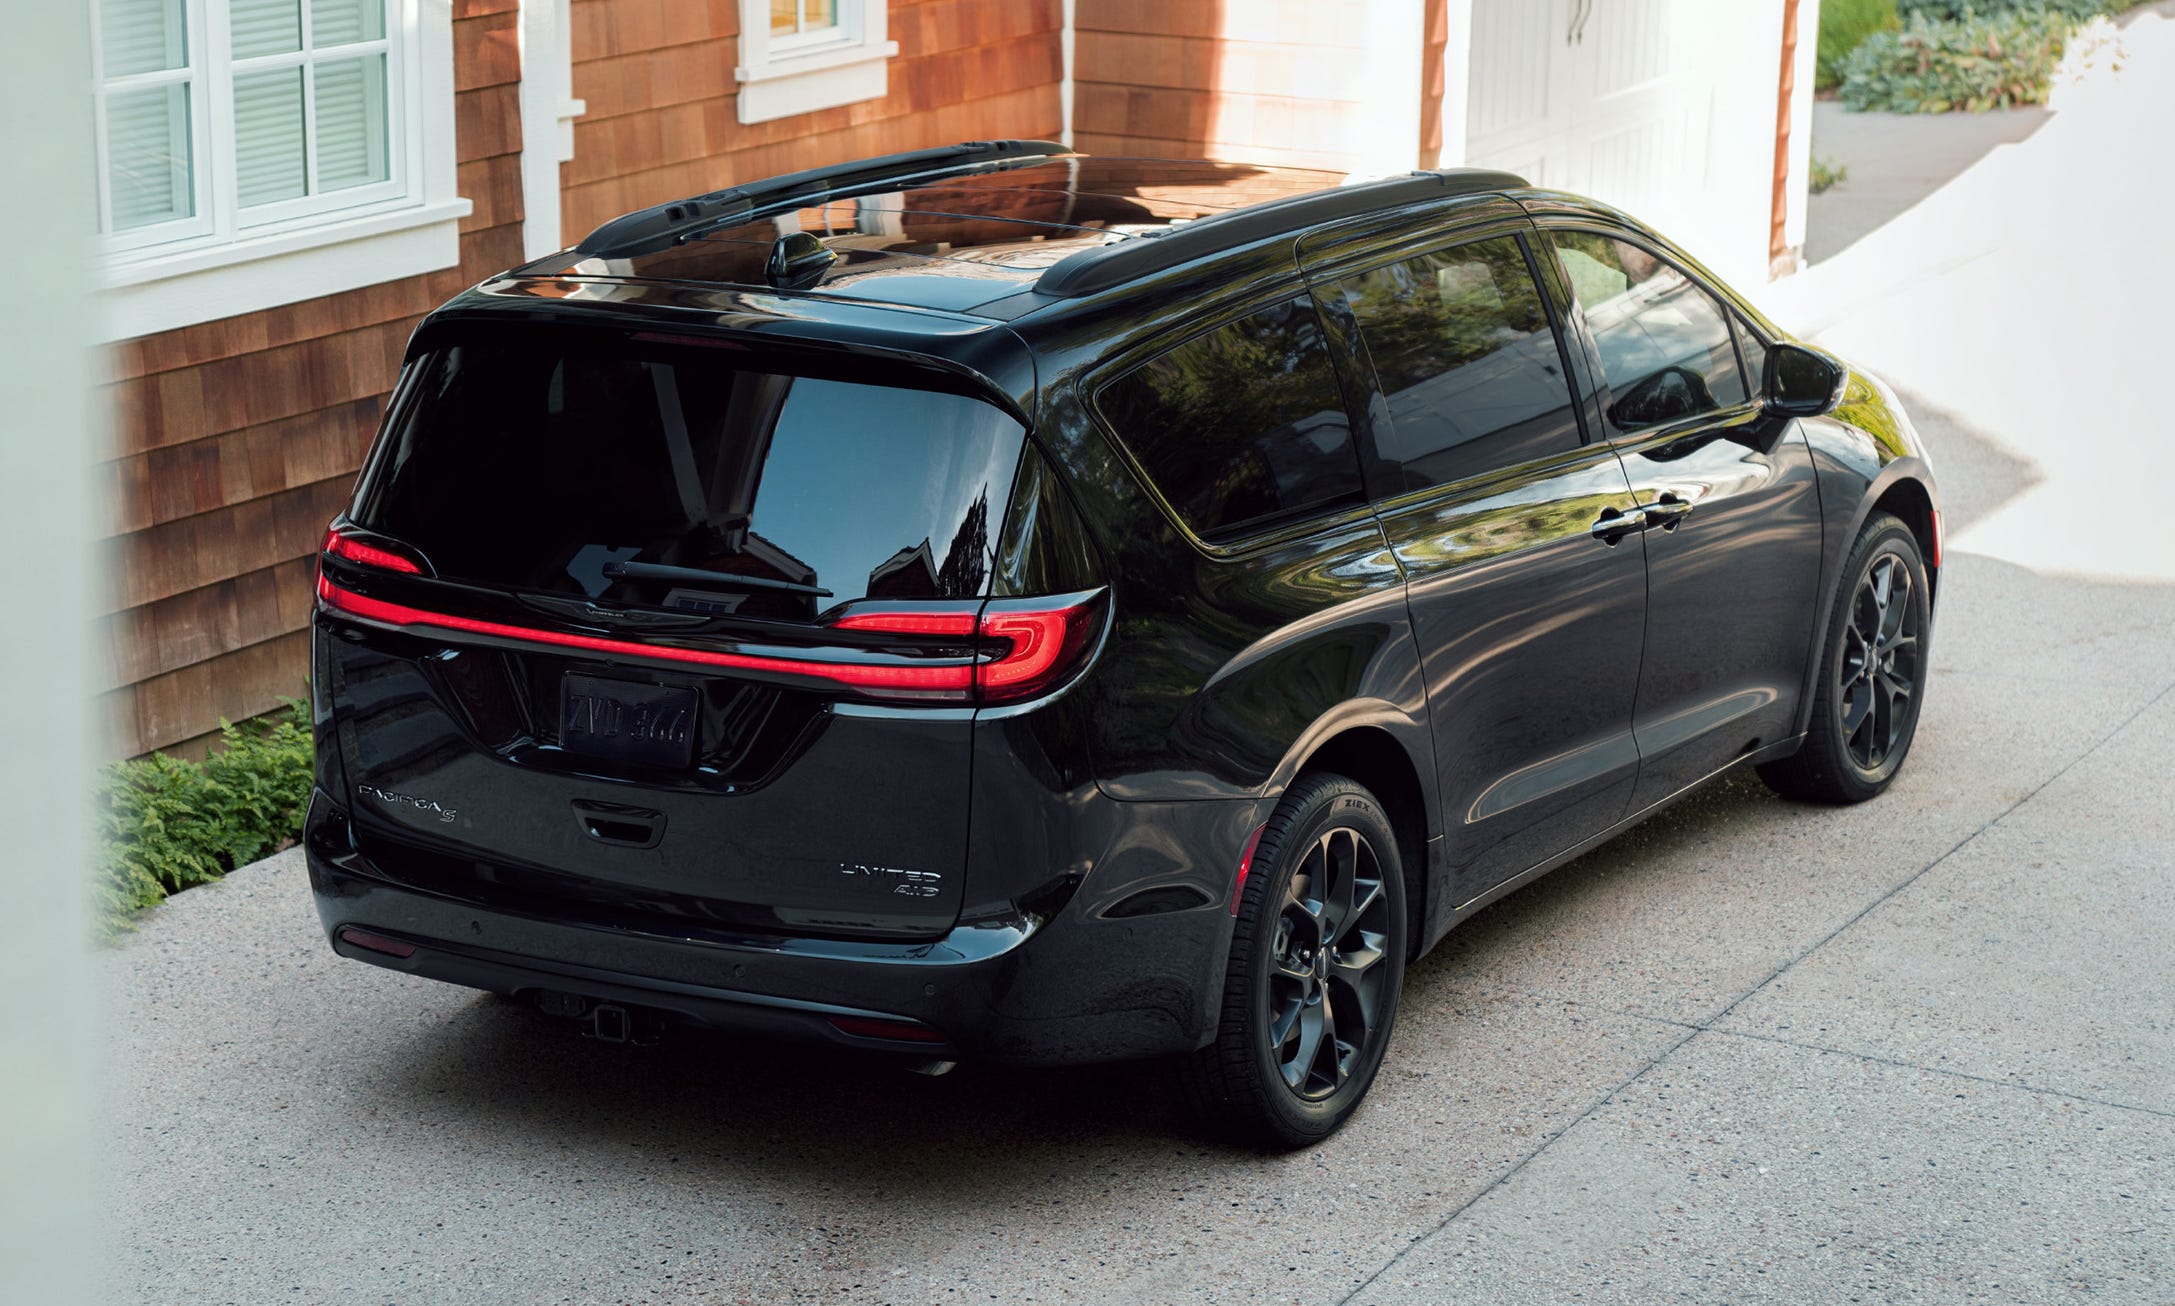 All-wheel drive returns in redesigned 2021 Chrysler Pacifica